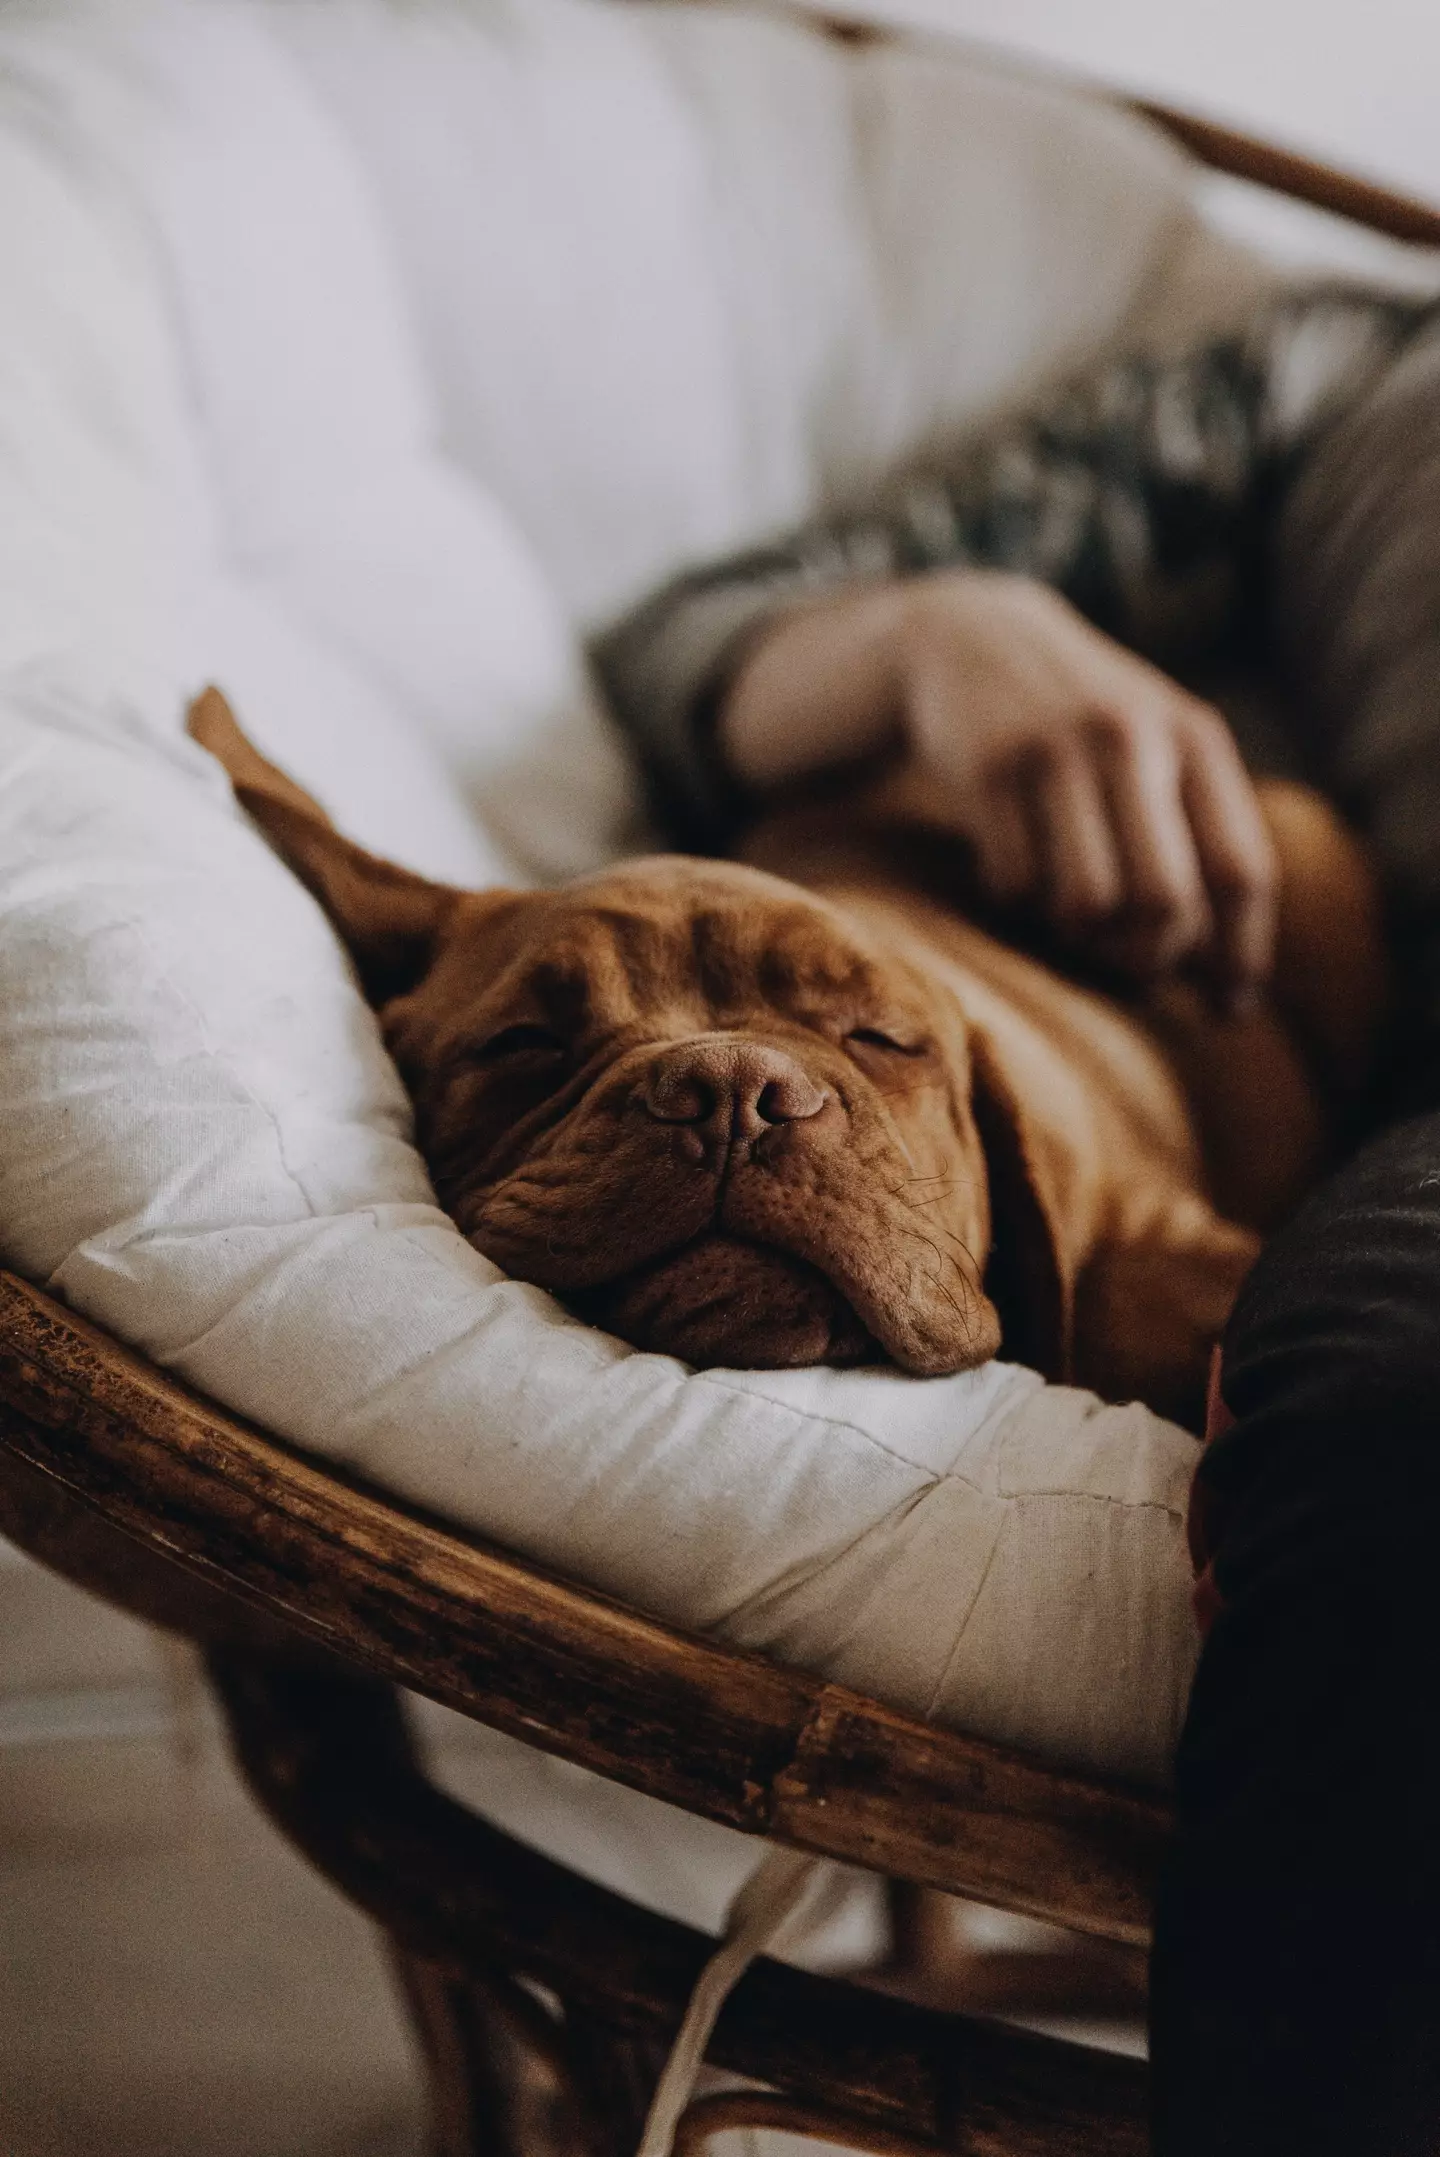 How your dog sleeps can tell you how they feel about you as well as their health, mood and personality. (